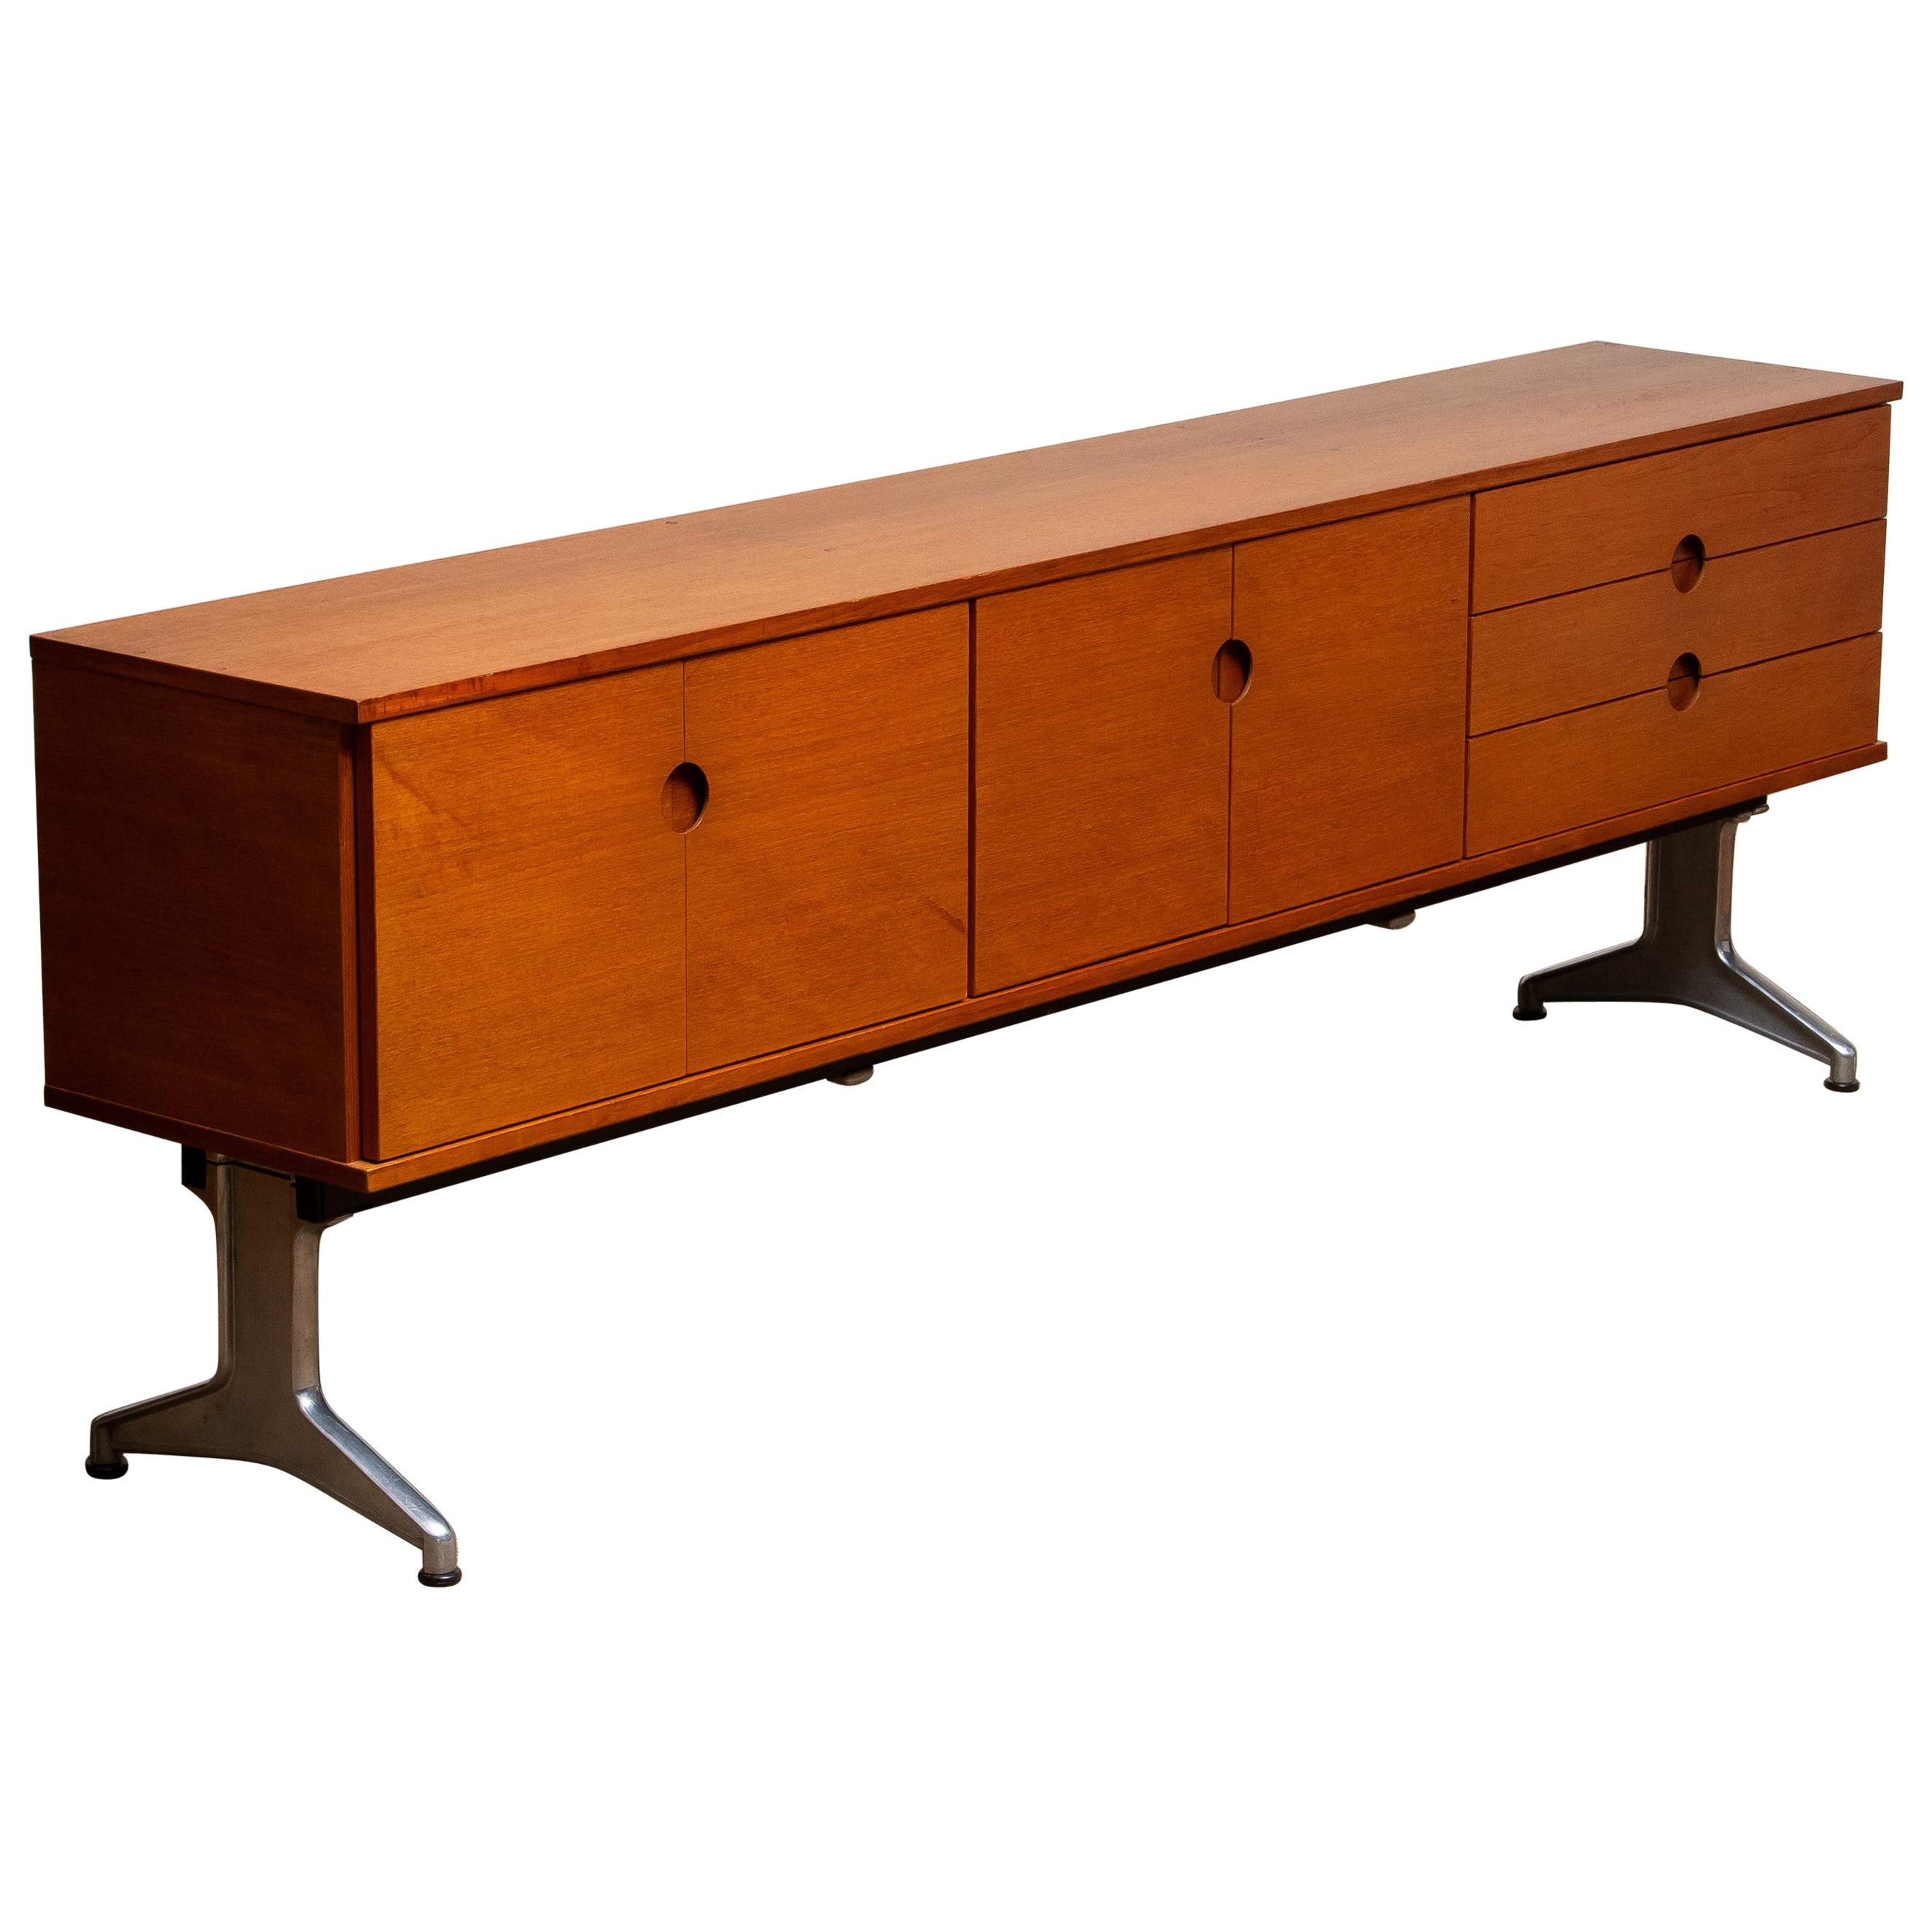 1960s Sideboard / Credenzas in Teak on a Aluminum Stand by Pertti Salmi, Norway